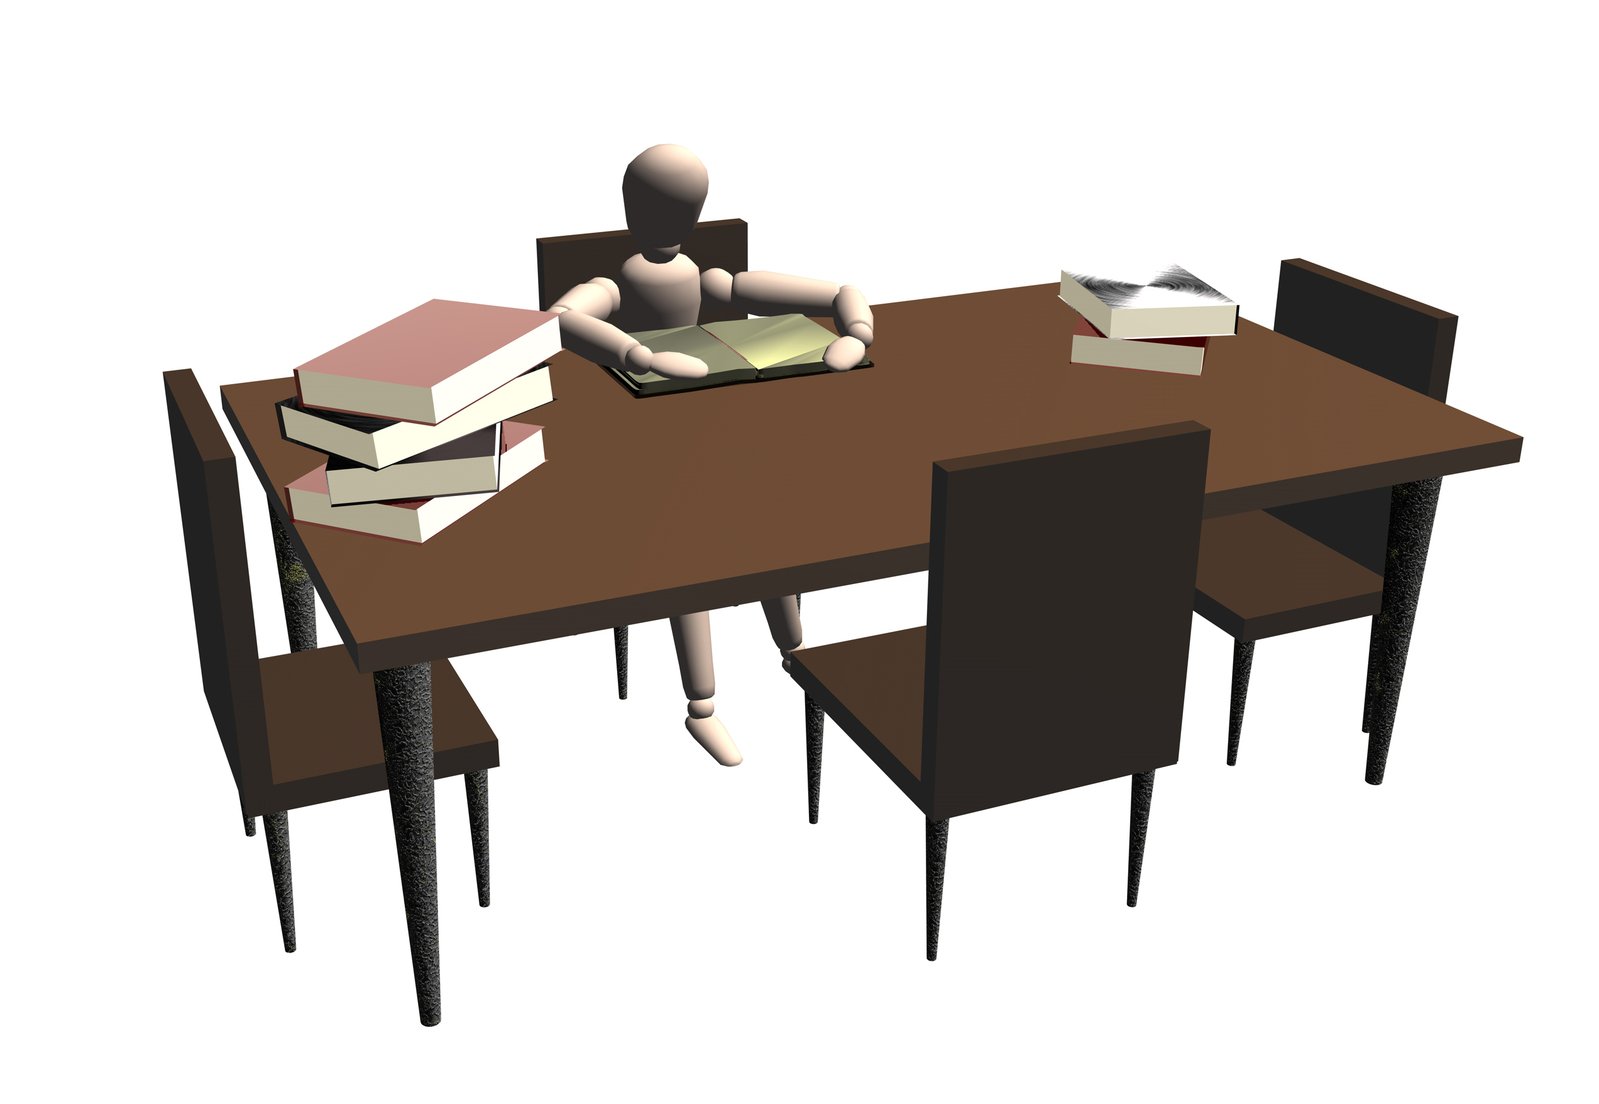 a 3d image of a woman seated at a table, with stacks of books